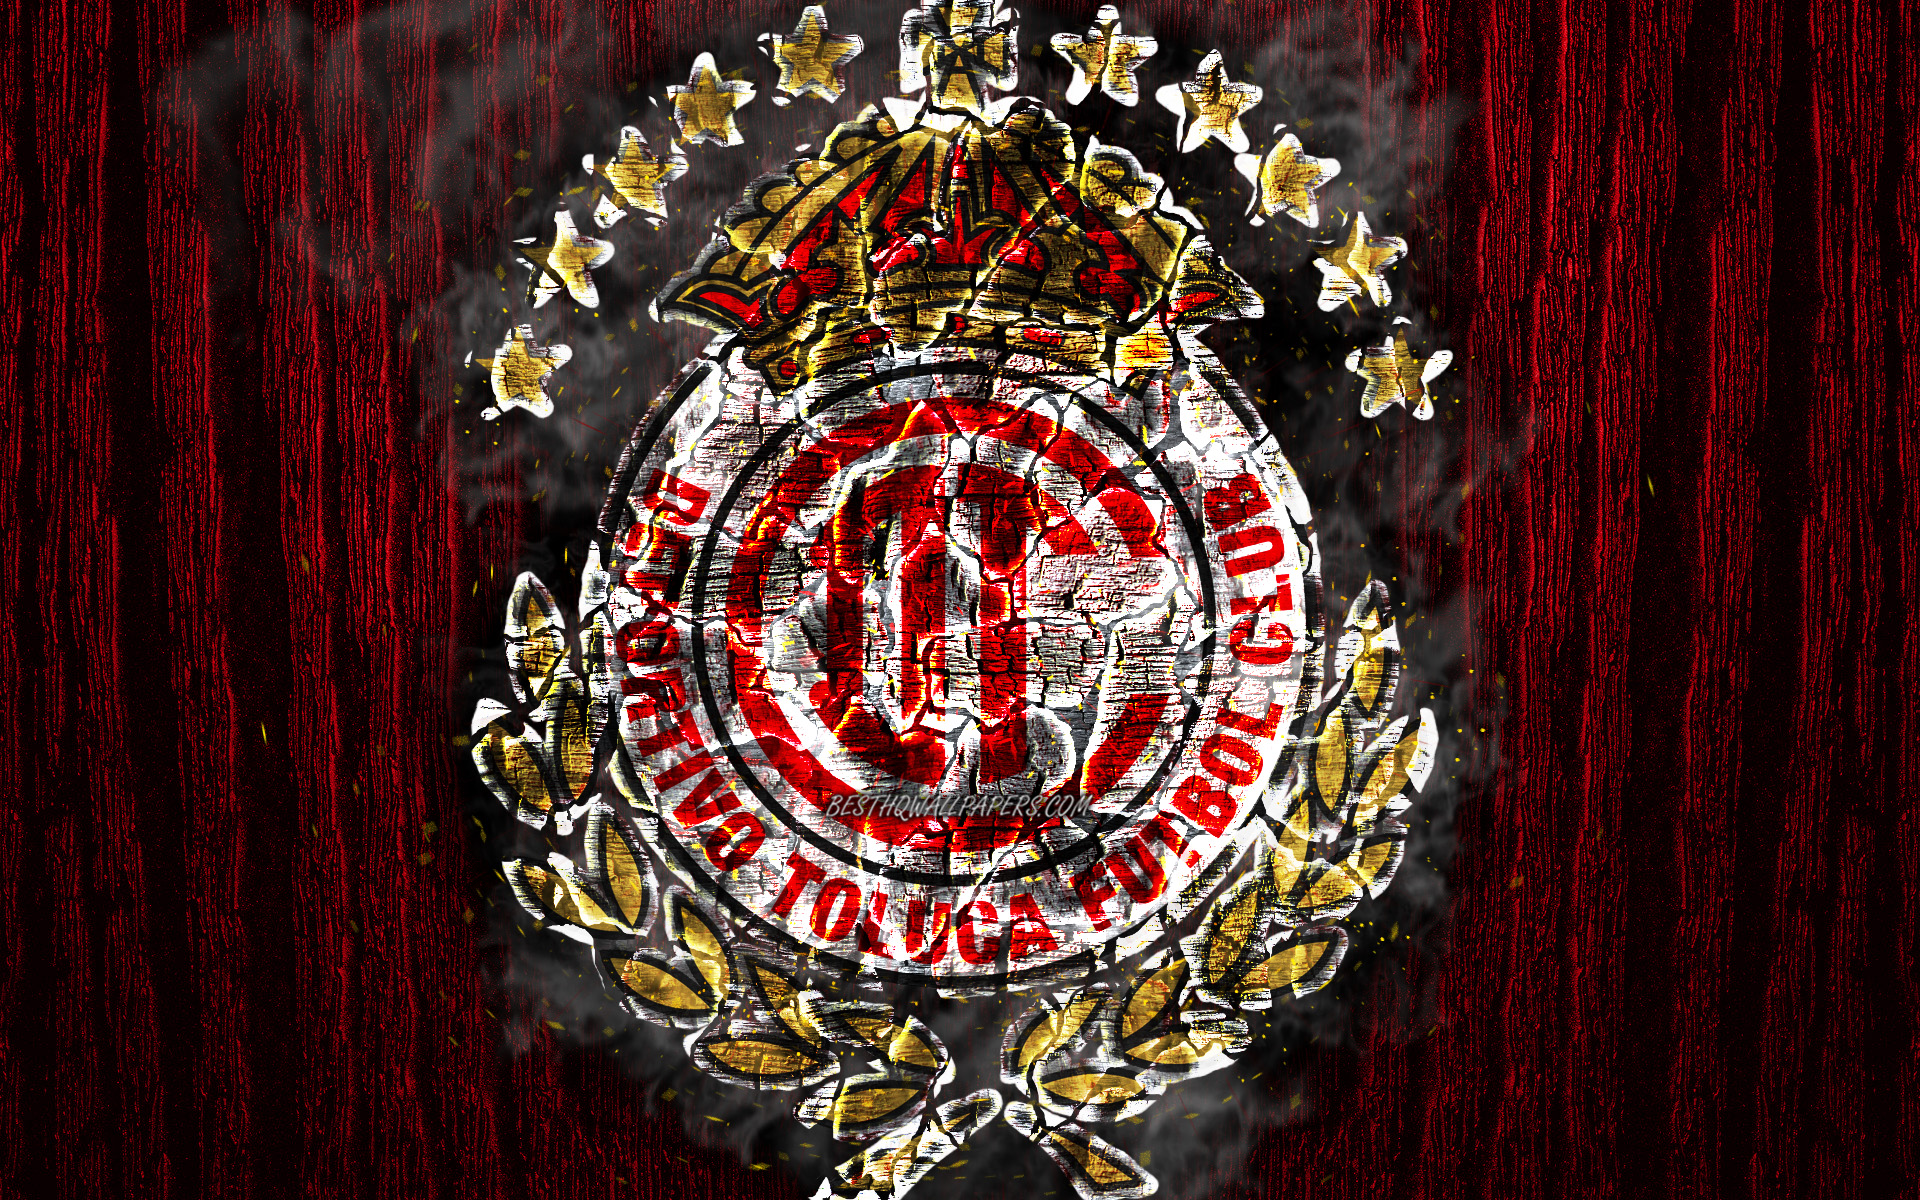 Download wallpapers Deportivo Toluca, scorched logo, Primera Division, red  wooden background, Liga MX, Mexican football club, grunge, Toluca FC,  football, soccer, Deportivo Toluca logo, fire texture, Mexiсo for desktop  with resolution 1920x1200.